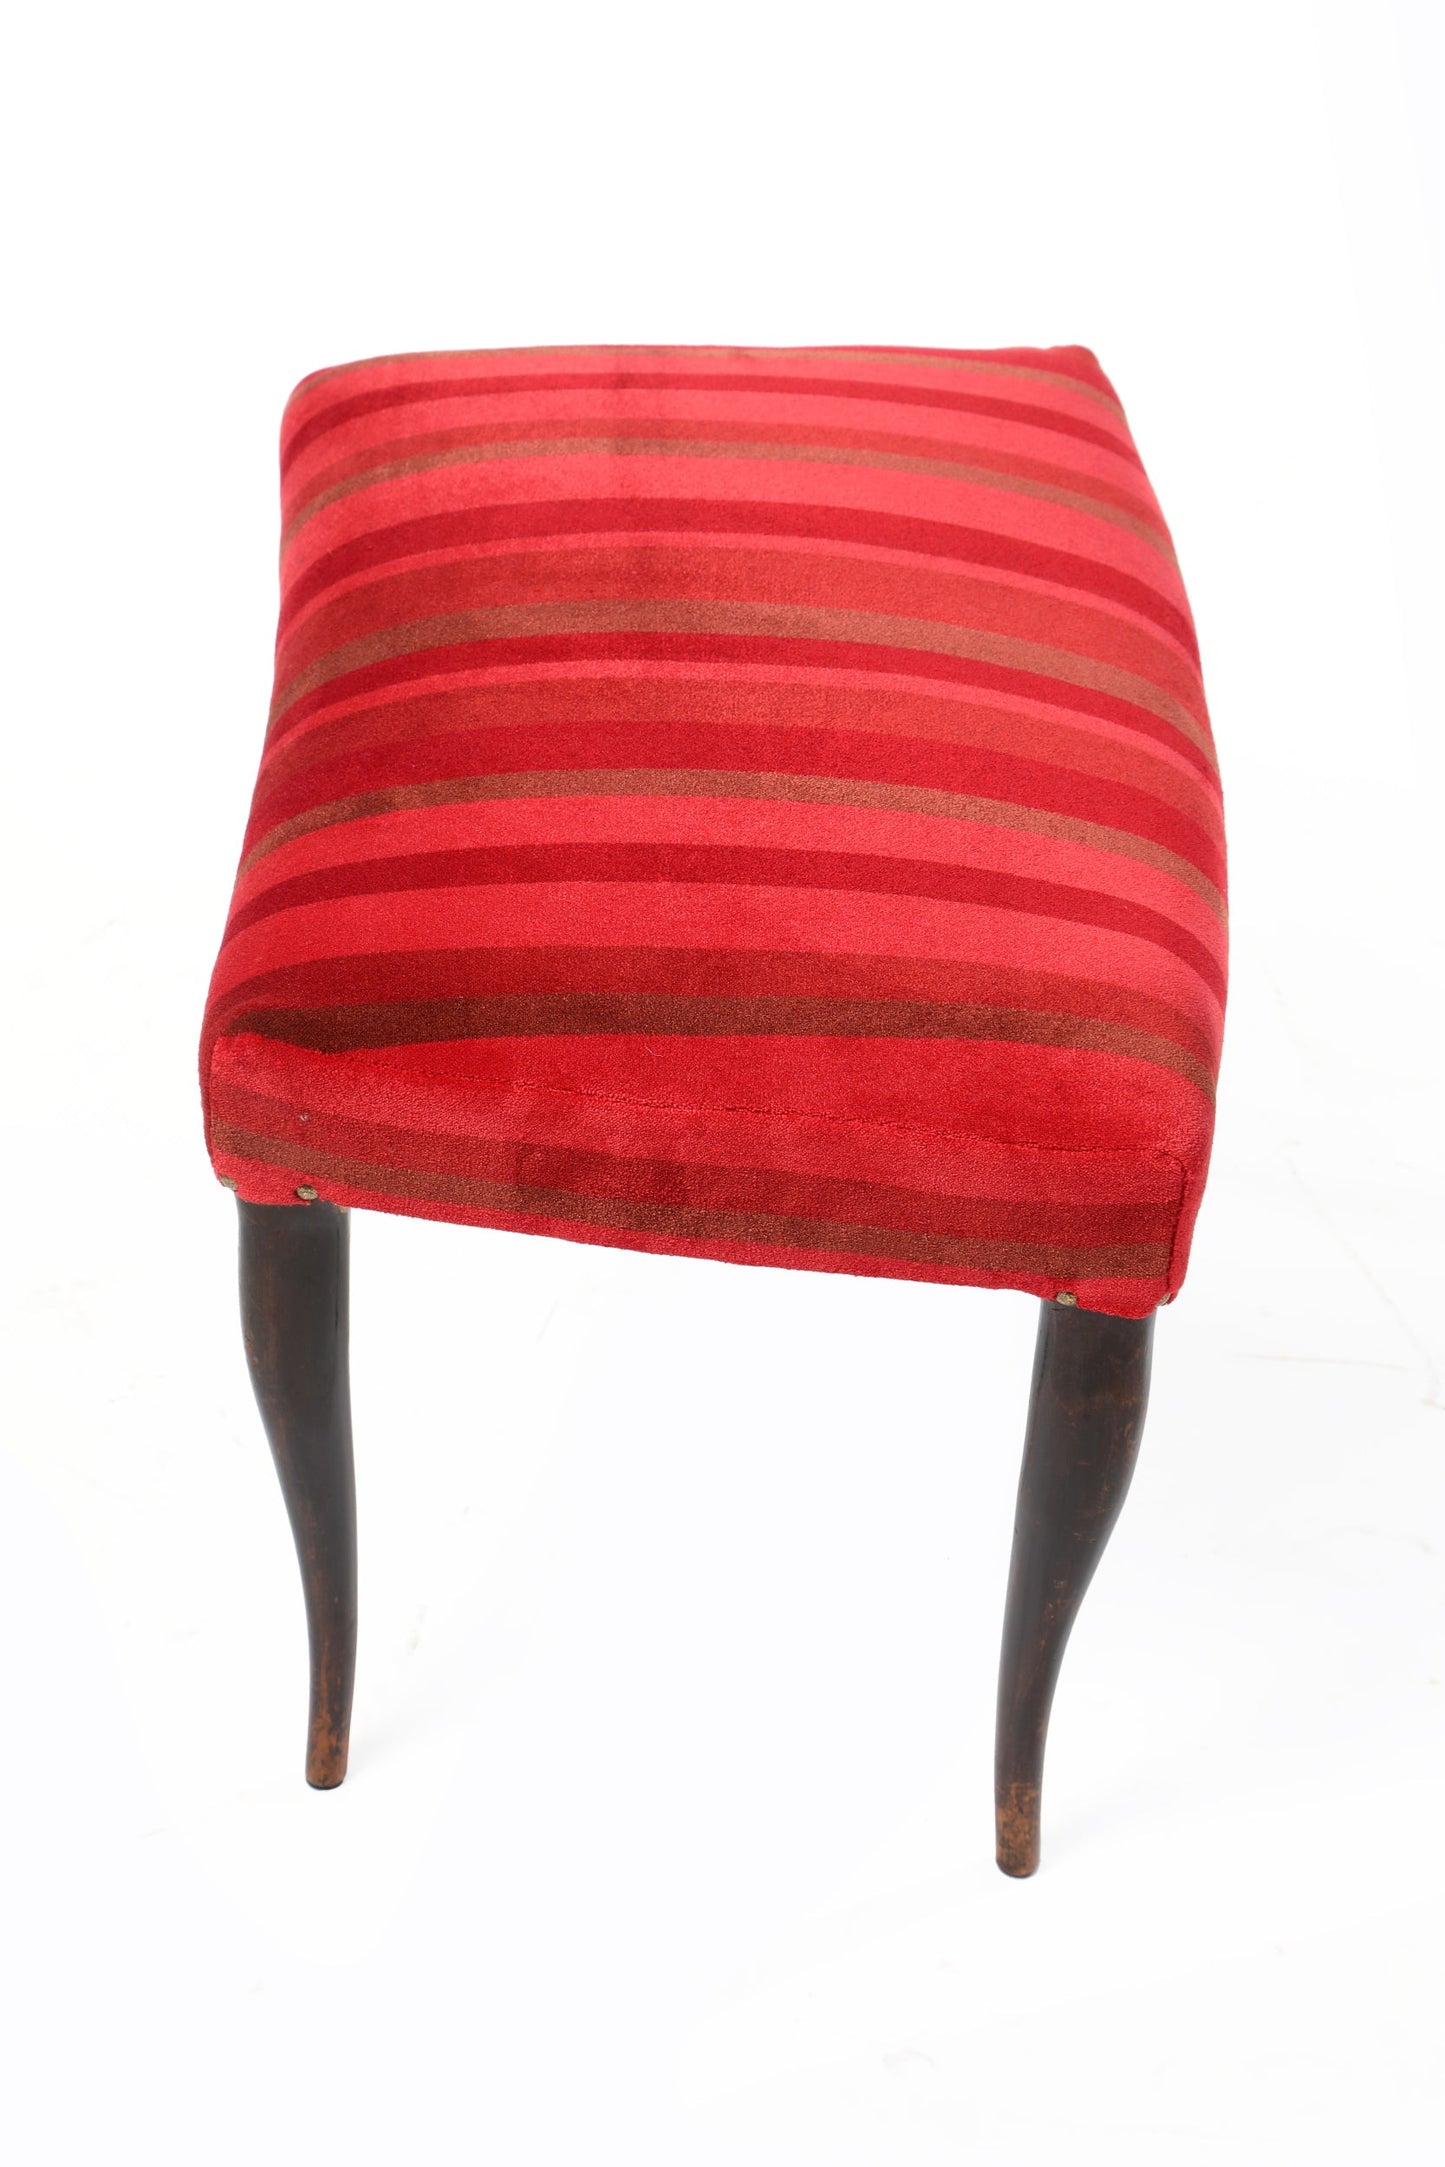 Small armchair with pouf from the 60s reinterpreted triplef